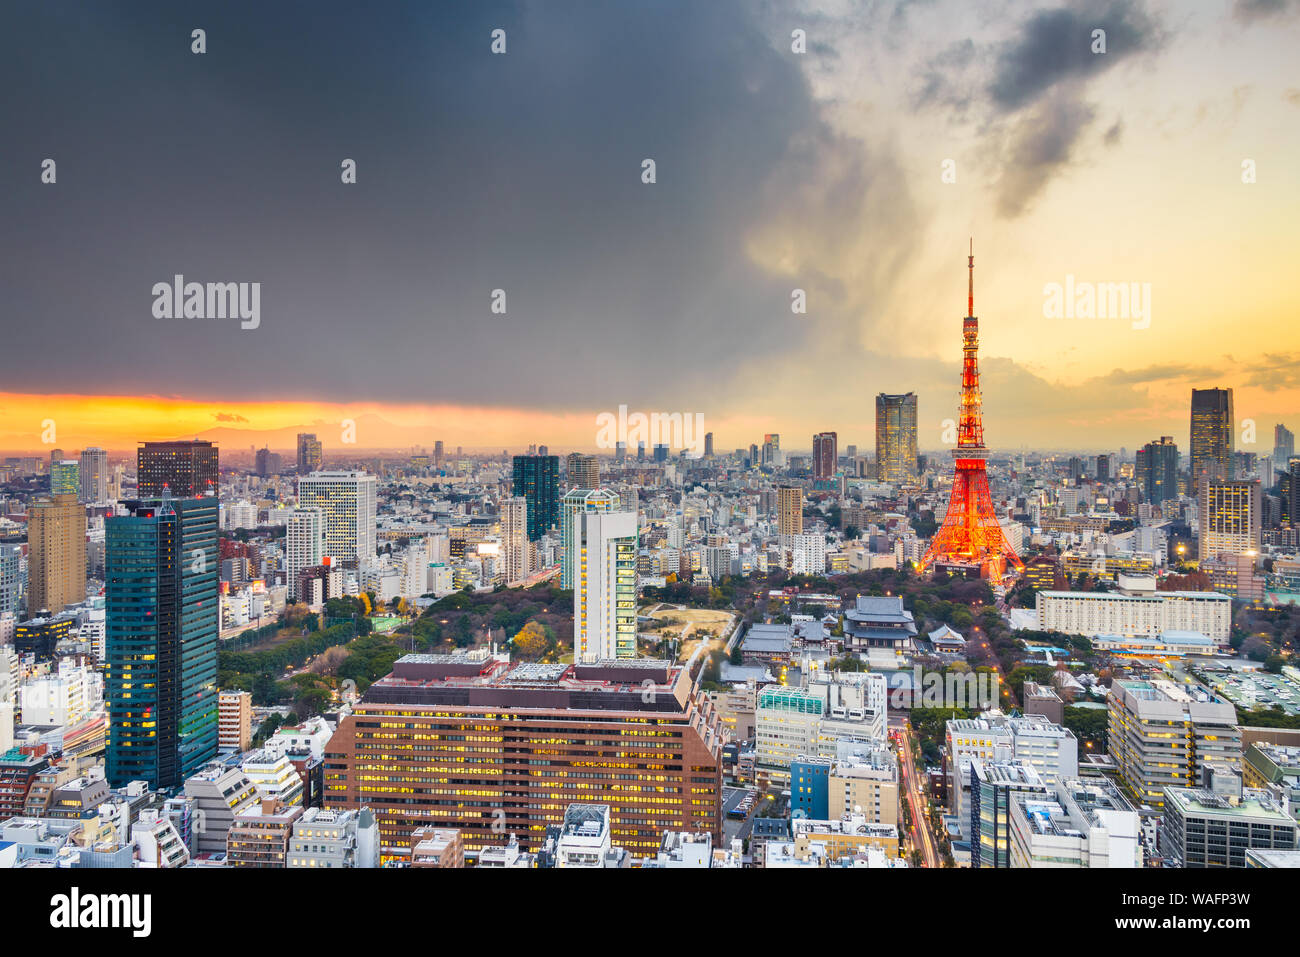 Tokyo, Japan famous skyline with the tower at dusk. Stock Photo